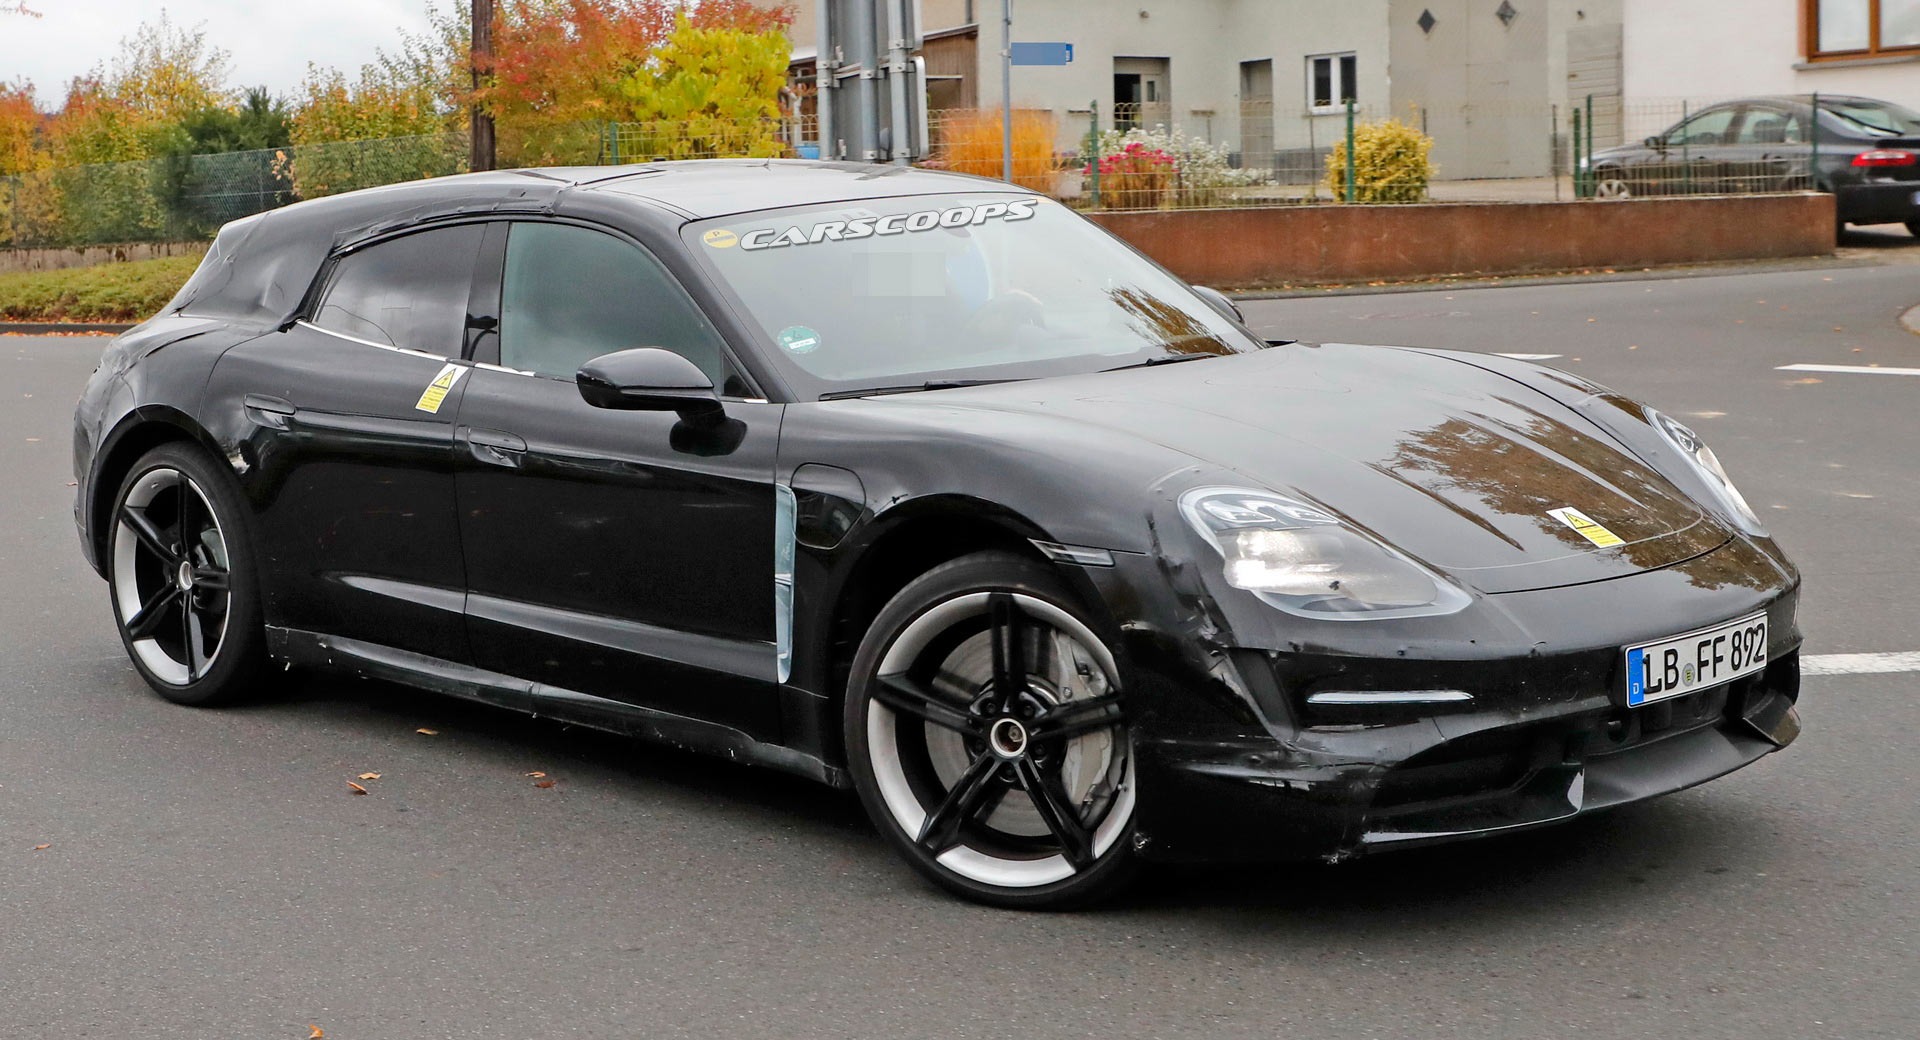 Porsche Taycan Cross Turismo Spotted, Brings Wagons Into The Electric Era